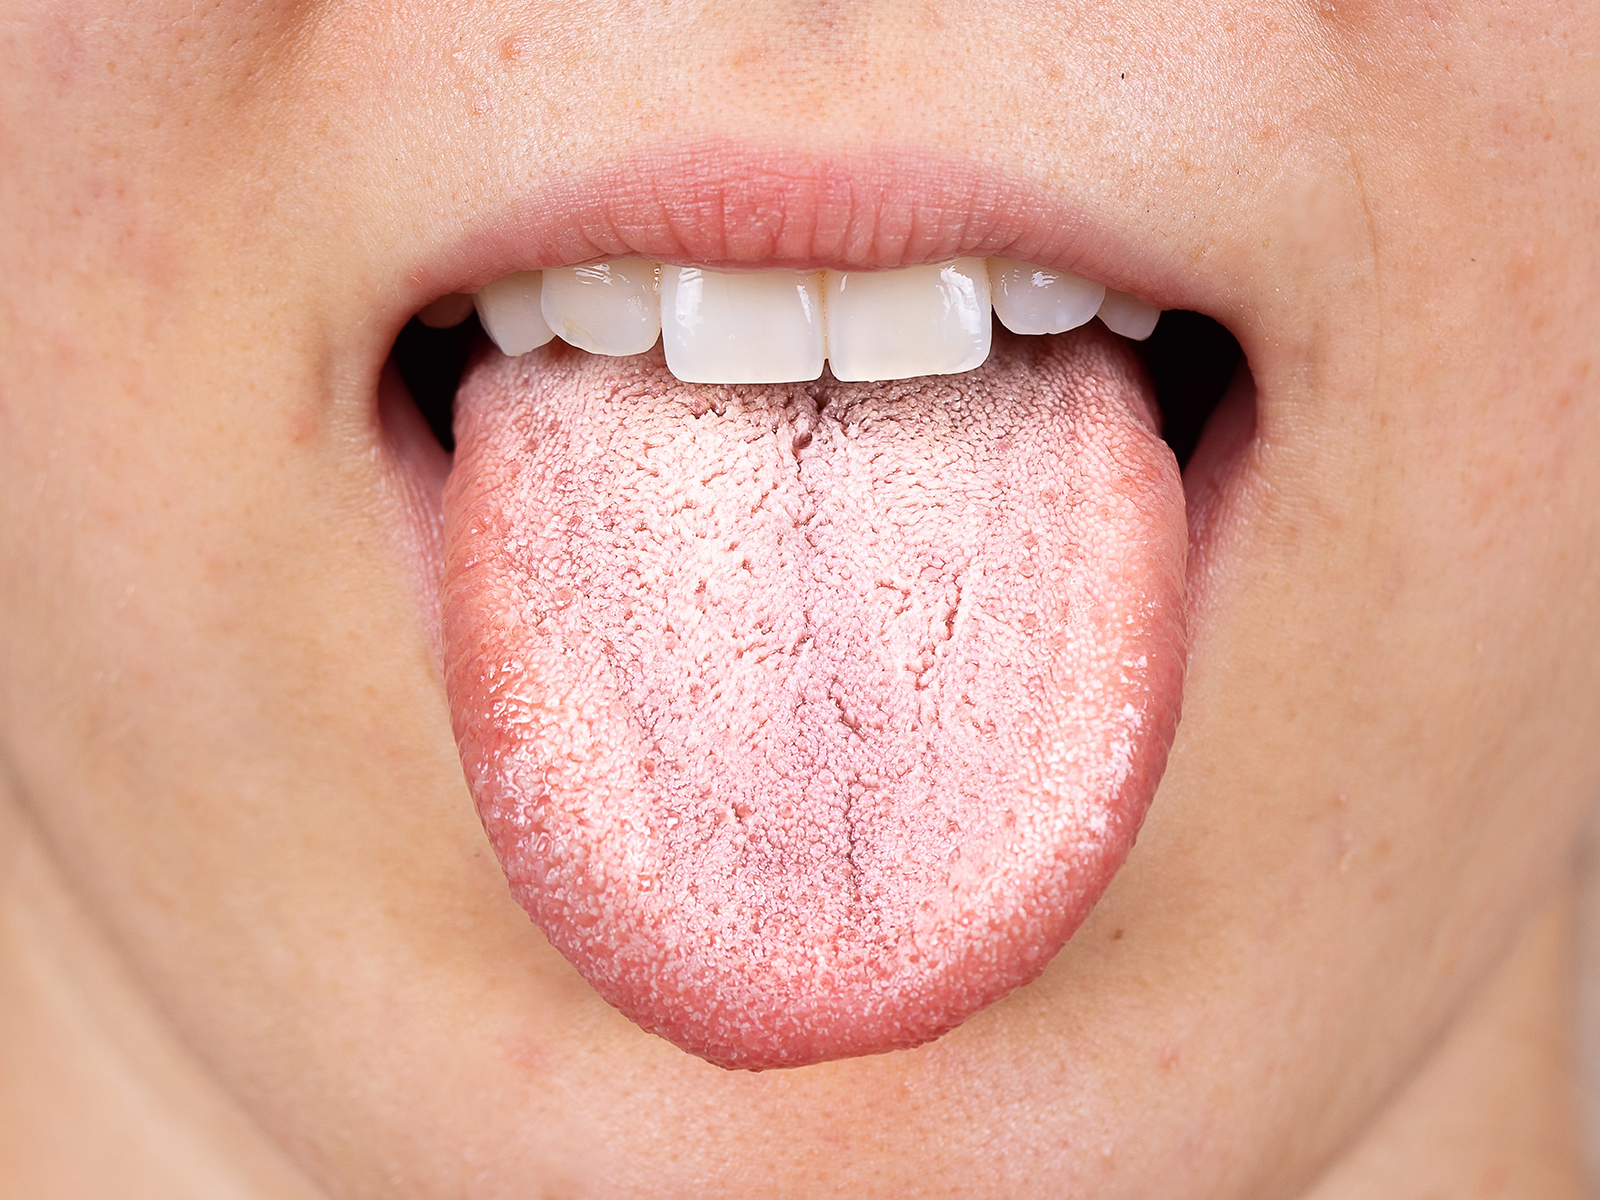 How Long Does Oral Thrush Last Without Treatment?